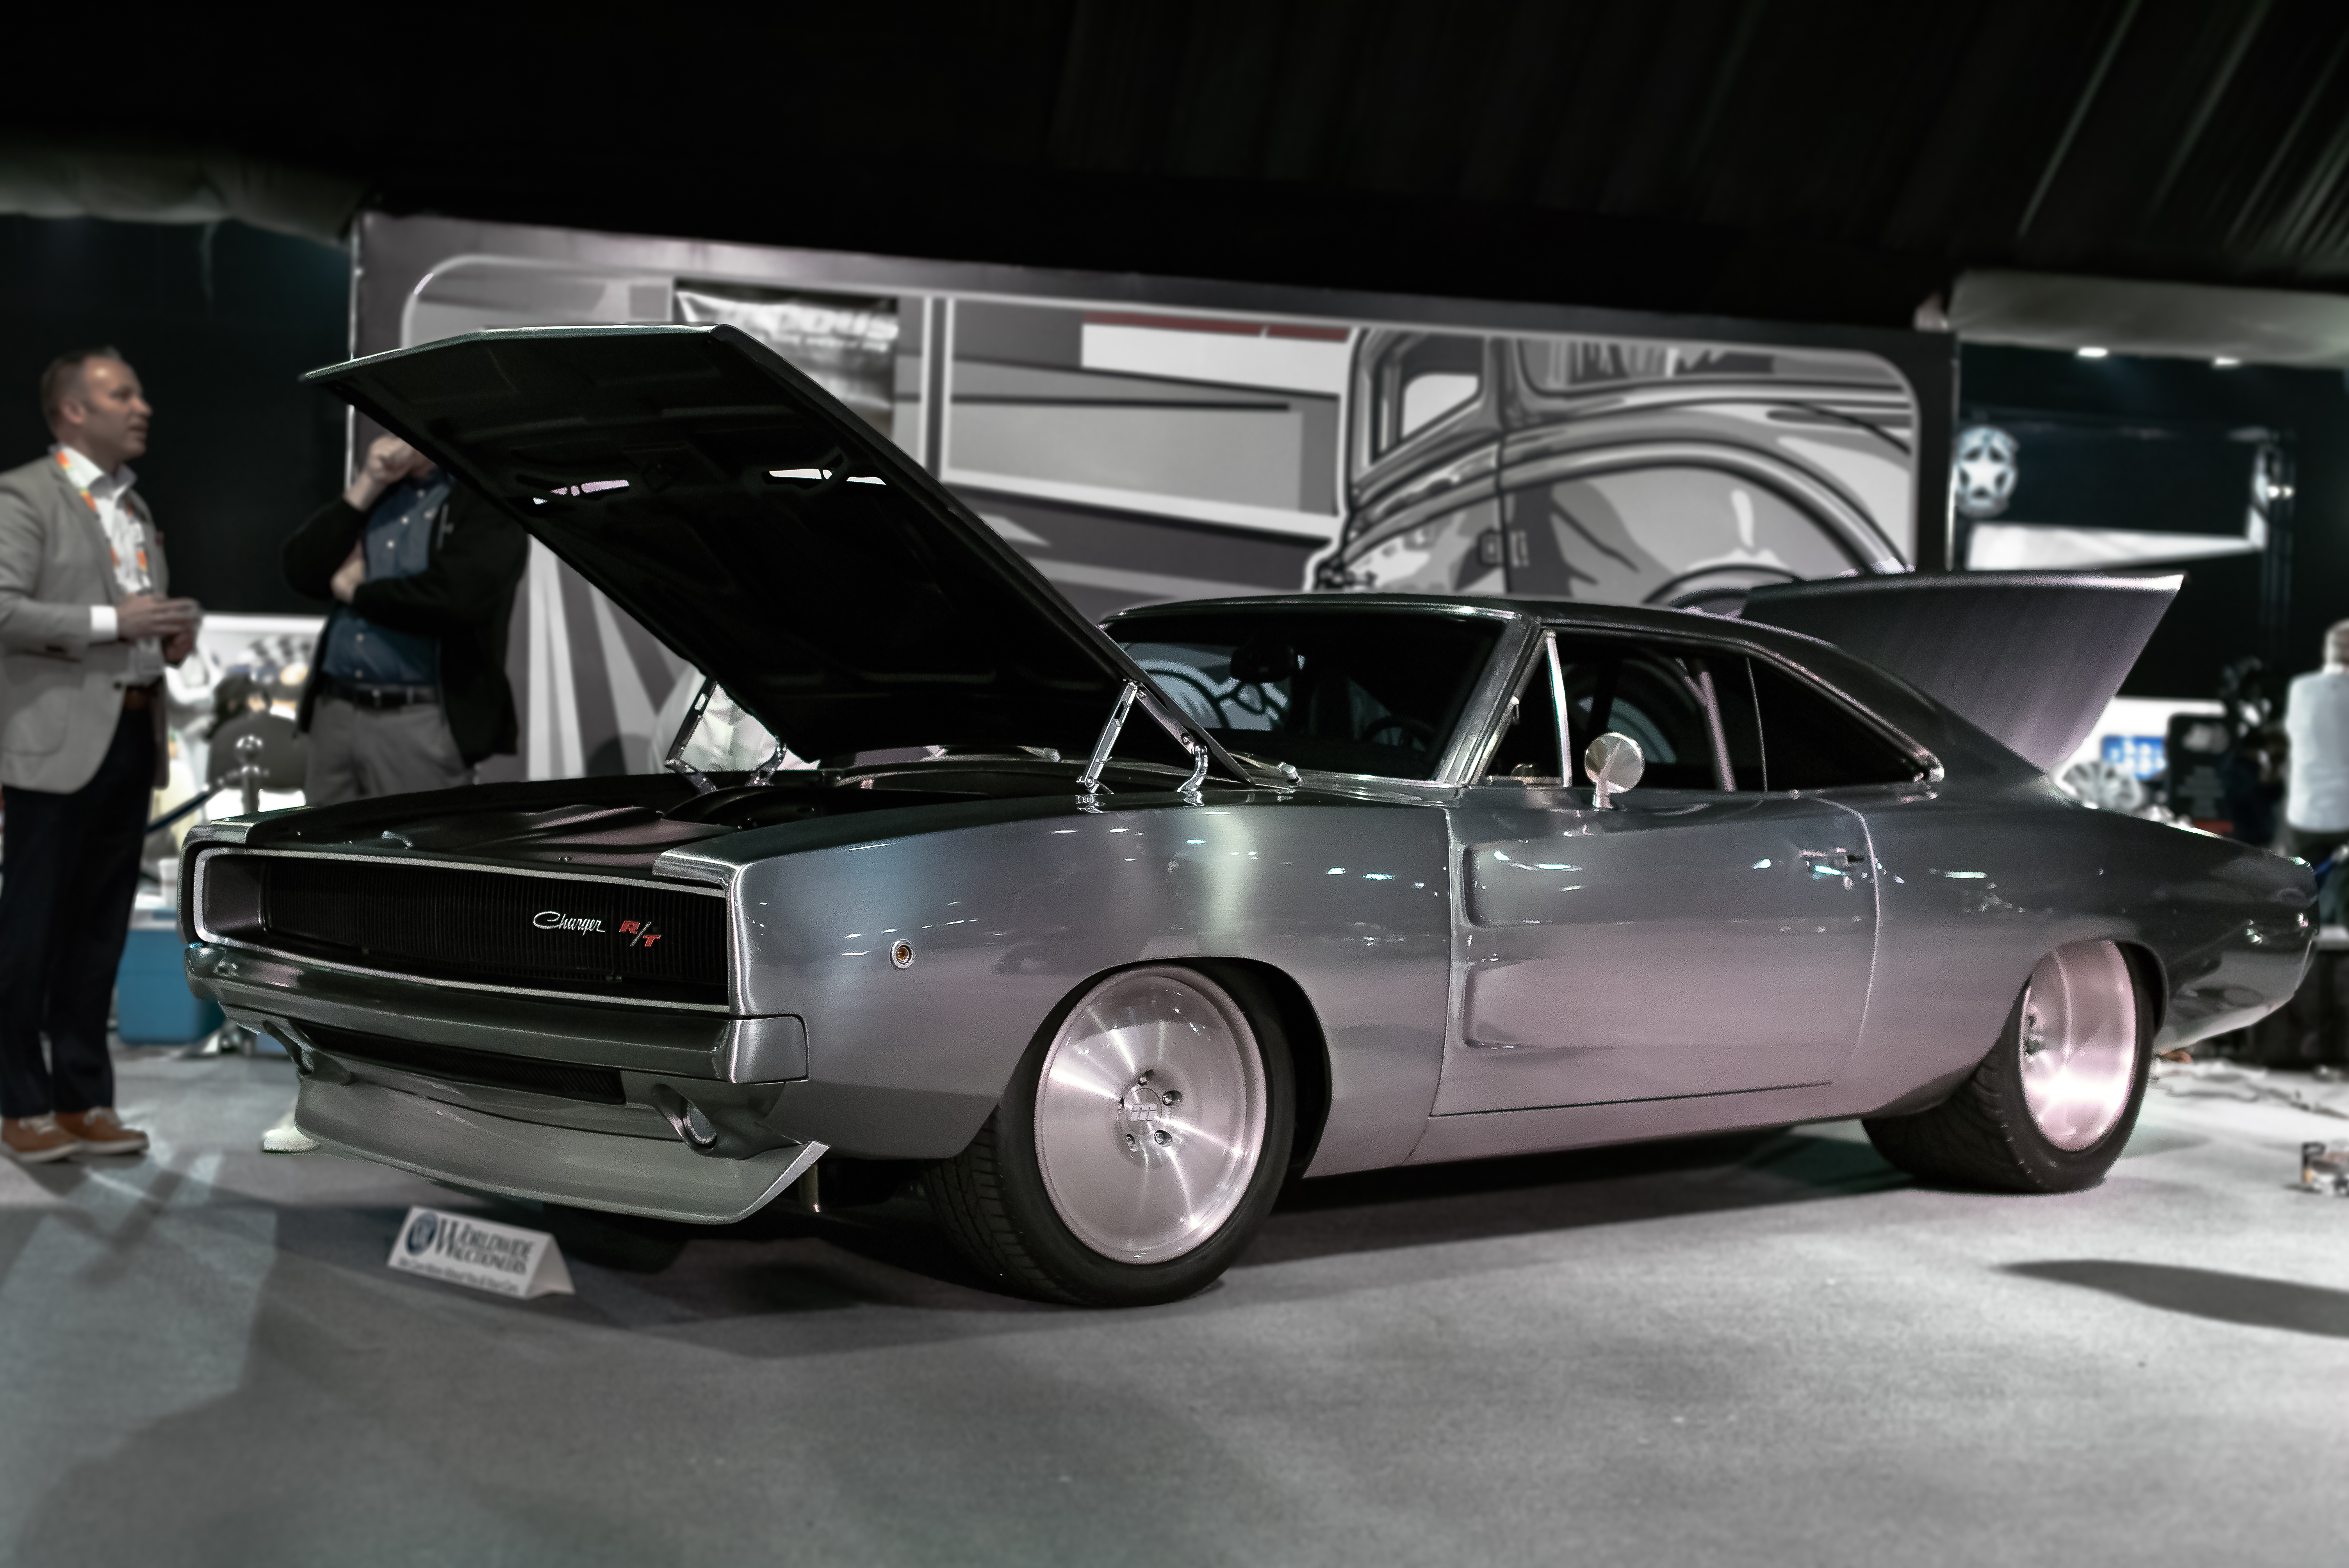 1968 Dodge Charger Maximus Wallpapers - Wallpaper Cave